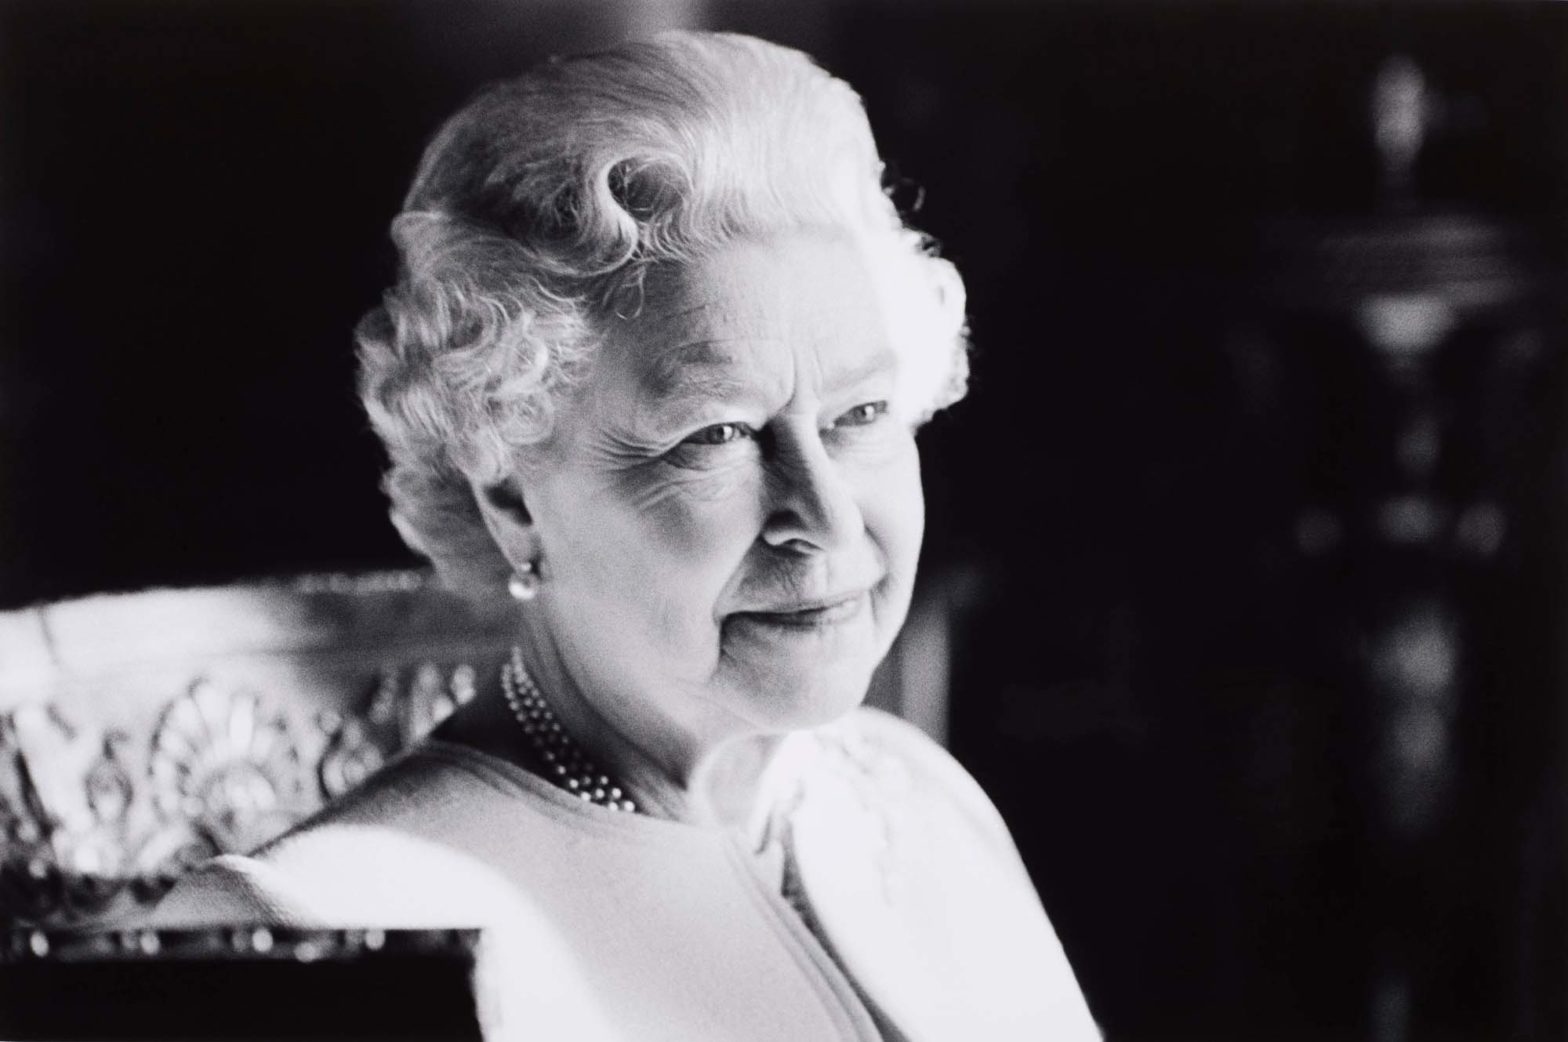 With deep sorrow the Royal Family have announced the death of Her Majesty Queen Elizabeth II.  We join the Royal Family, the whole of the Commonwealth and the world in mourning her passing